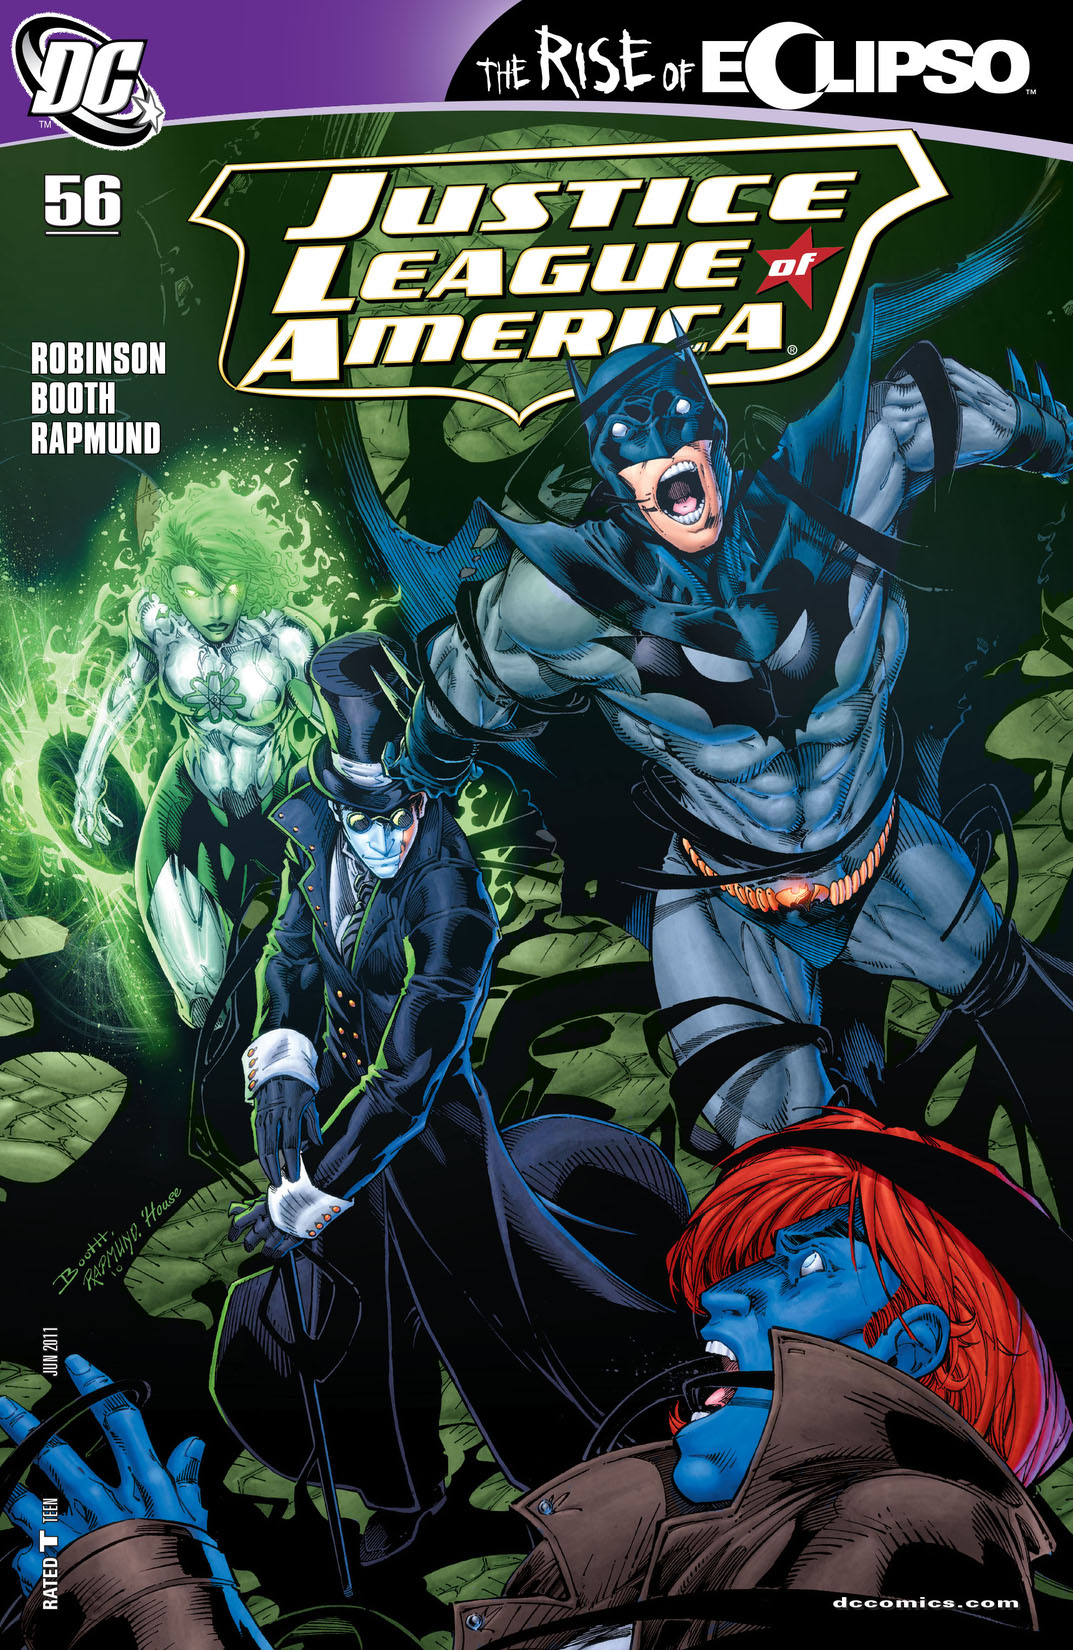 Justice League of America (2006-) #56 preview images